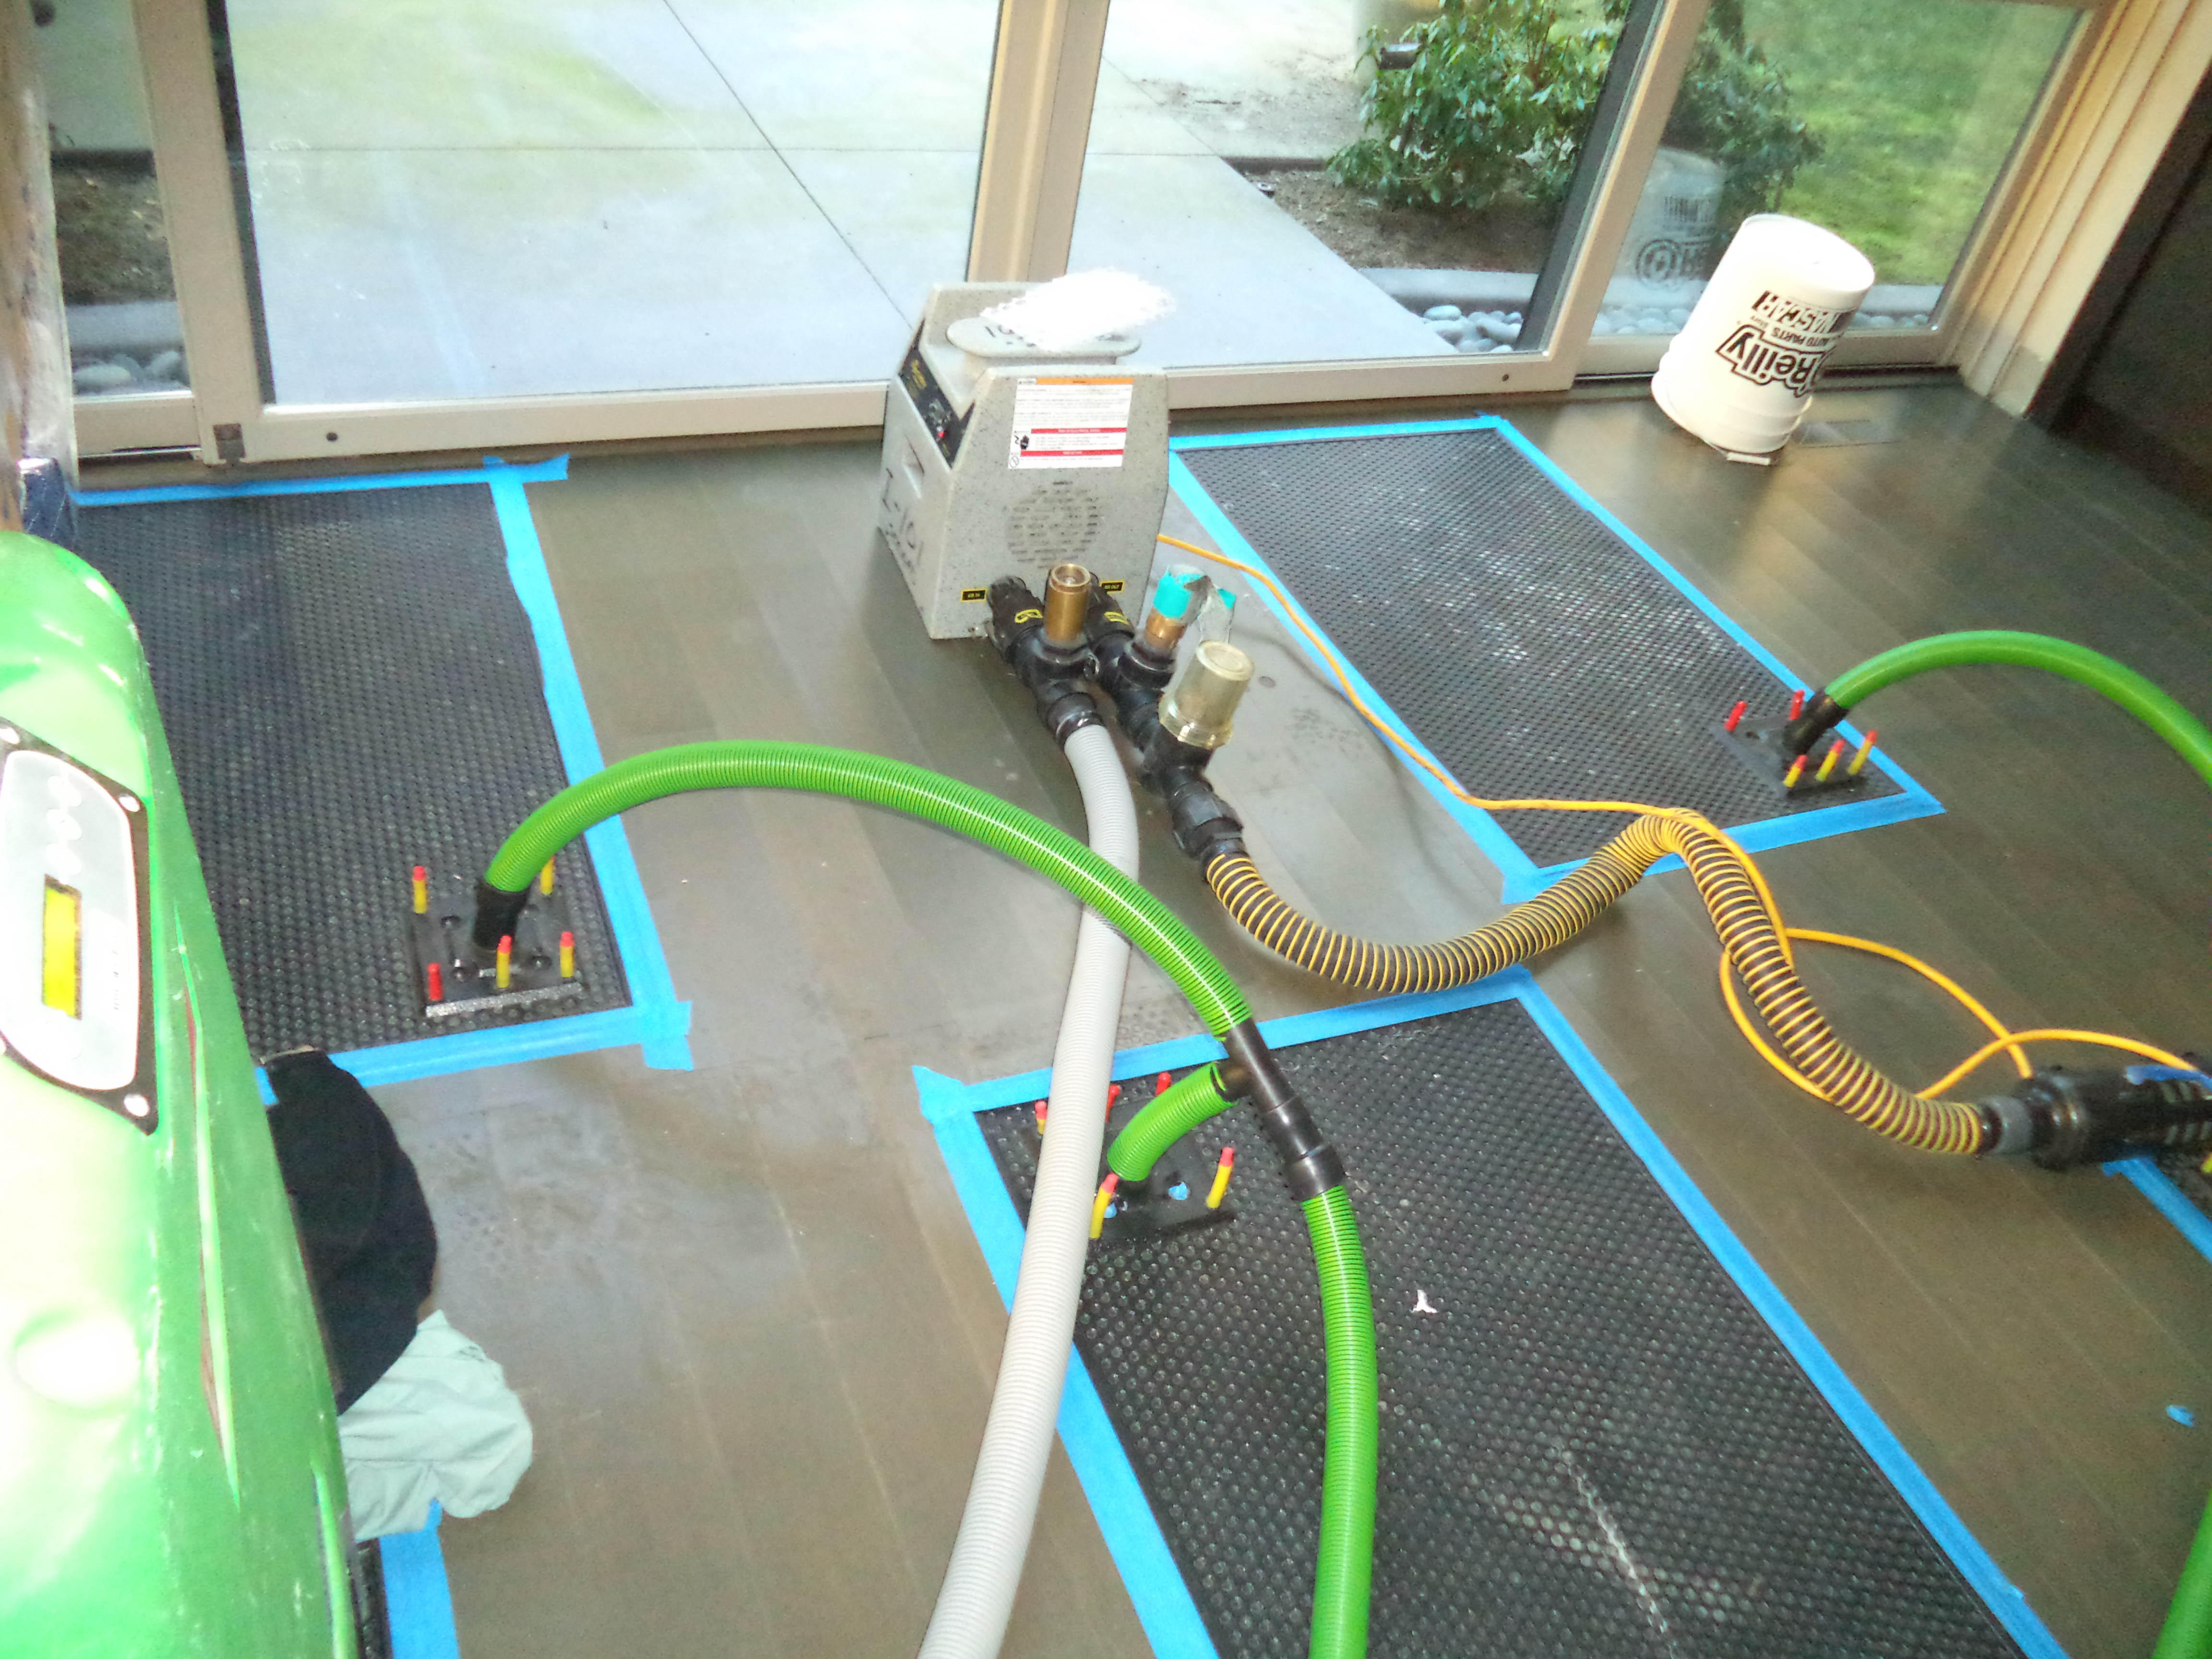 Call SERVPRO of Renton when your office is affected by heavy rains. This Renton Business called our team when water found its way into their flooring.